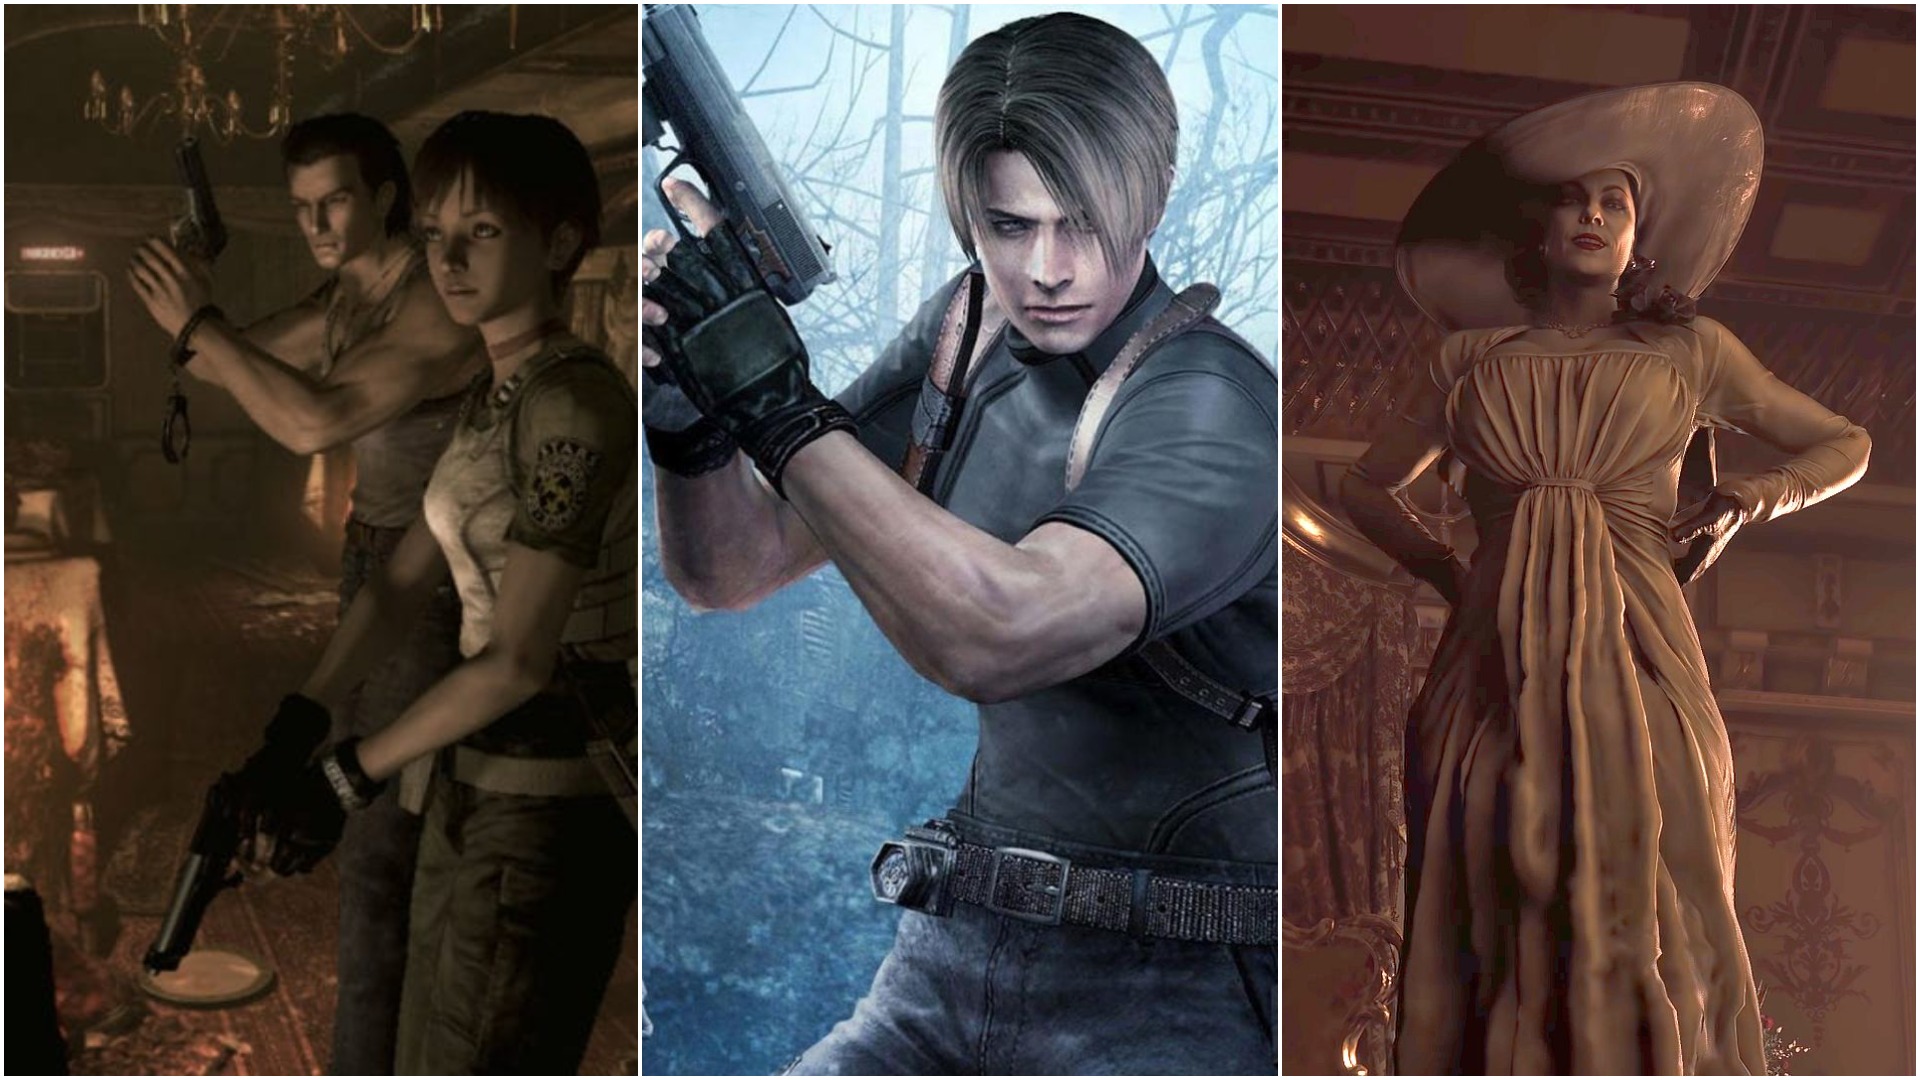 The Timeline Of All The Main Events In The Resident Evil Series